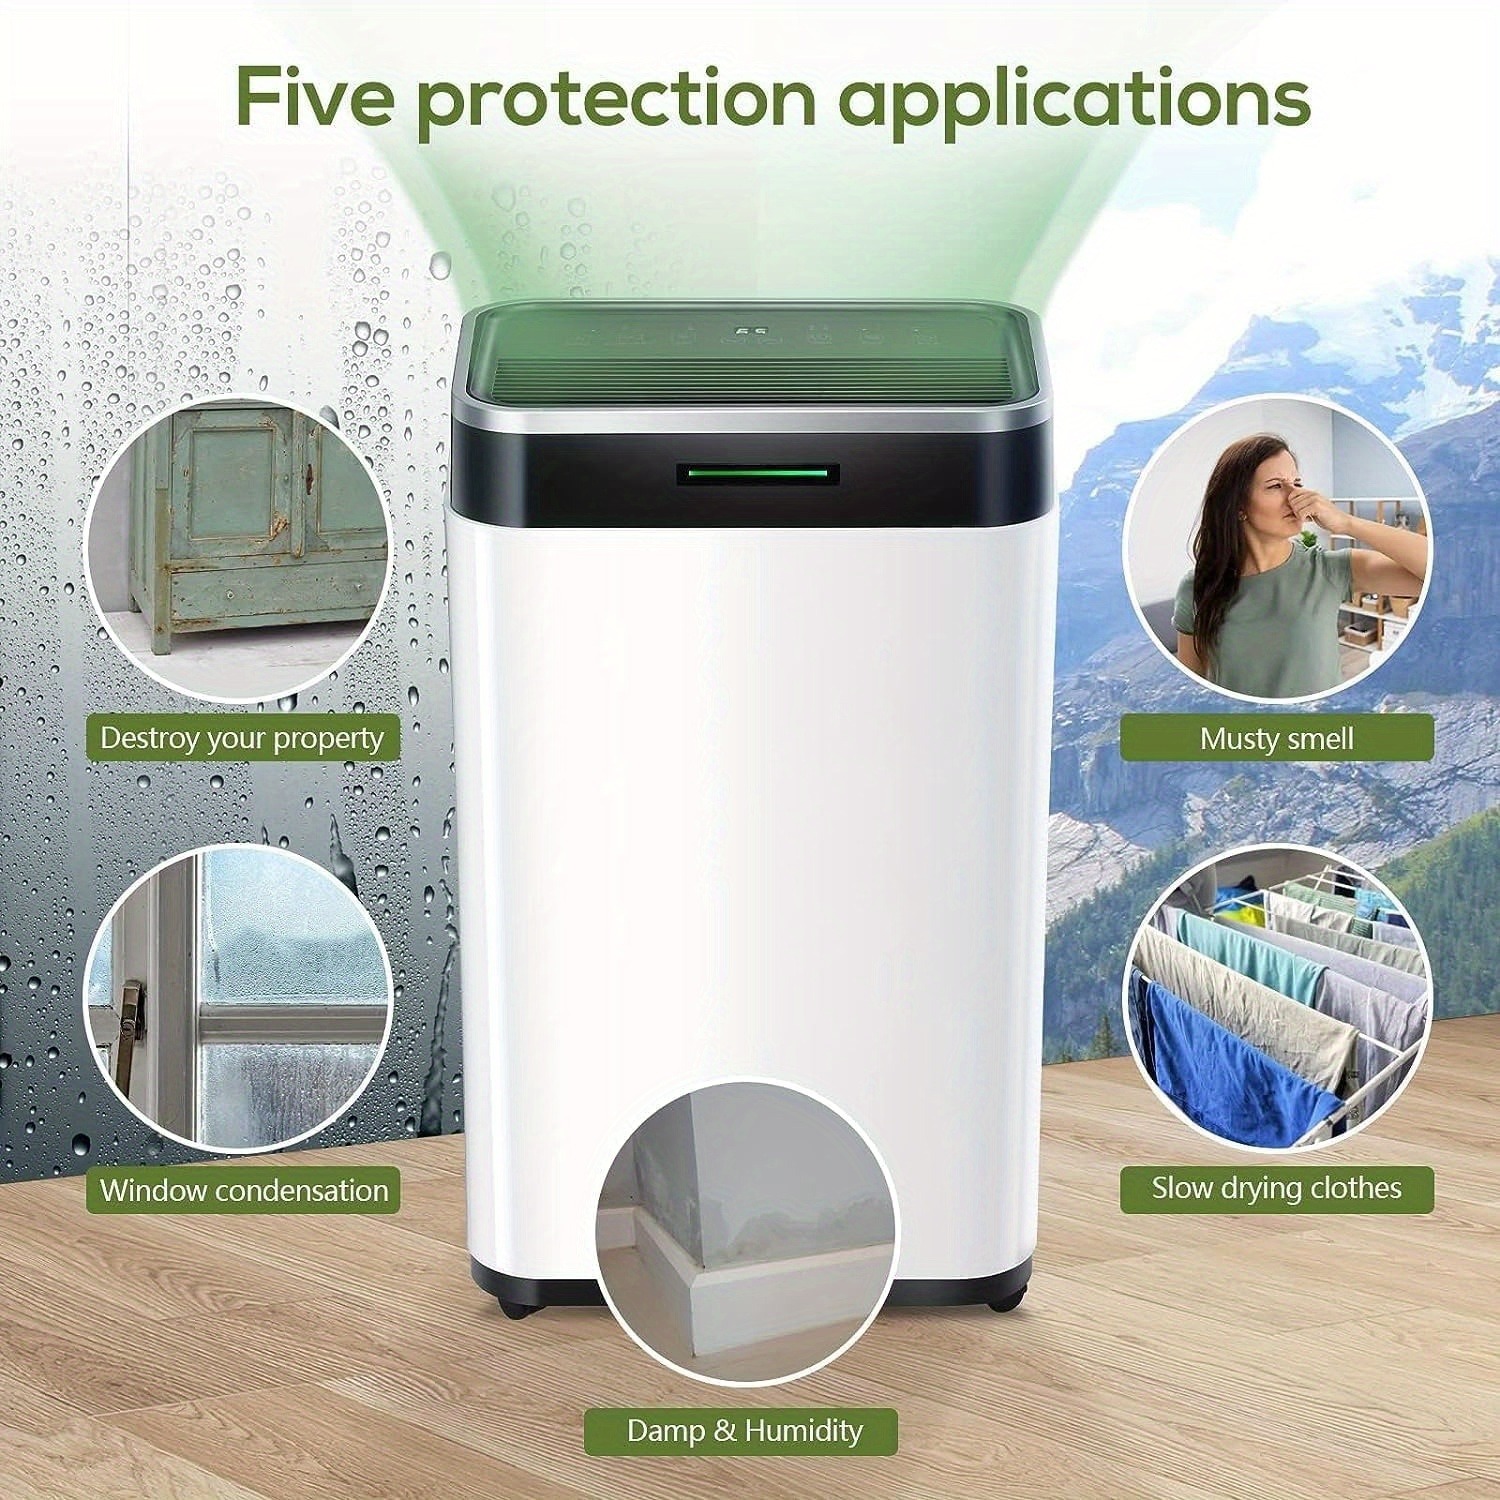 

4500 Sq.ft Dehumidifier Home Basement Bathroom Bedroom, 45ppd, 6.5l Water Tank With Drain Hose, Intelligent Humidity Control, Auto Or Manual Drainage, Auto Shut-off